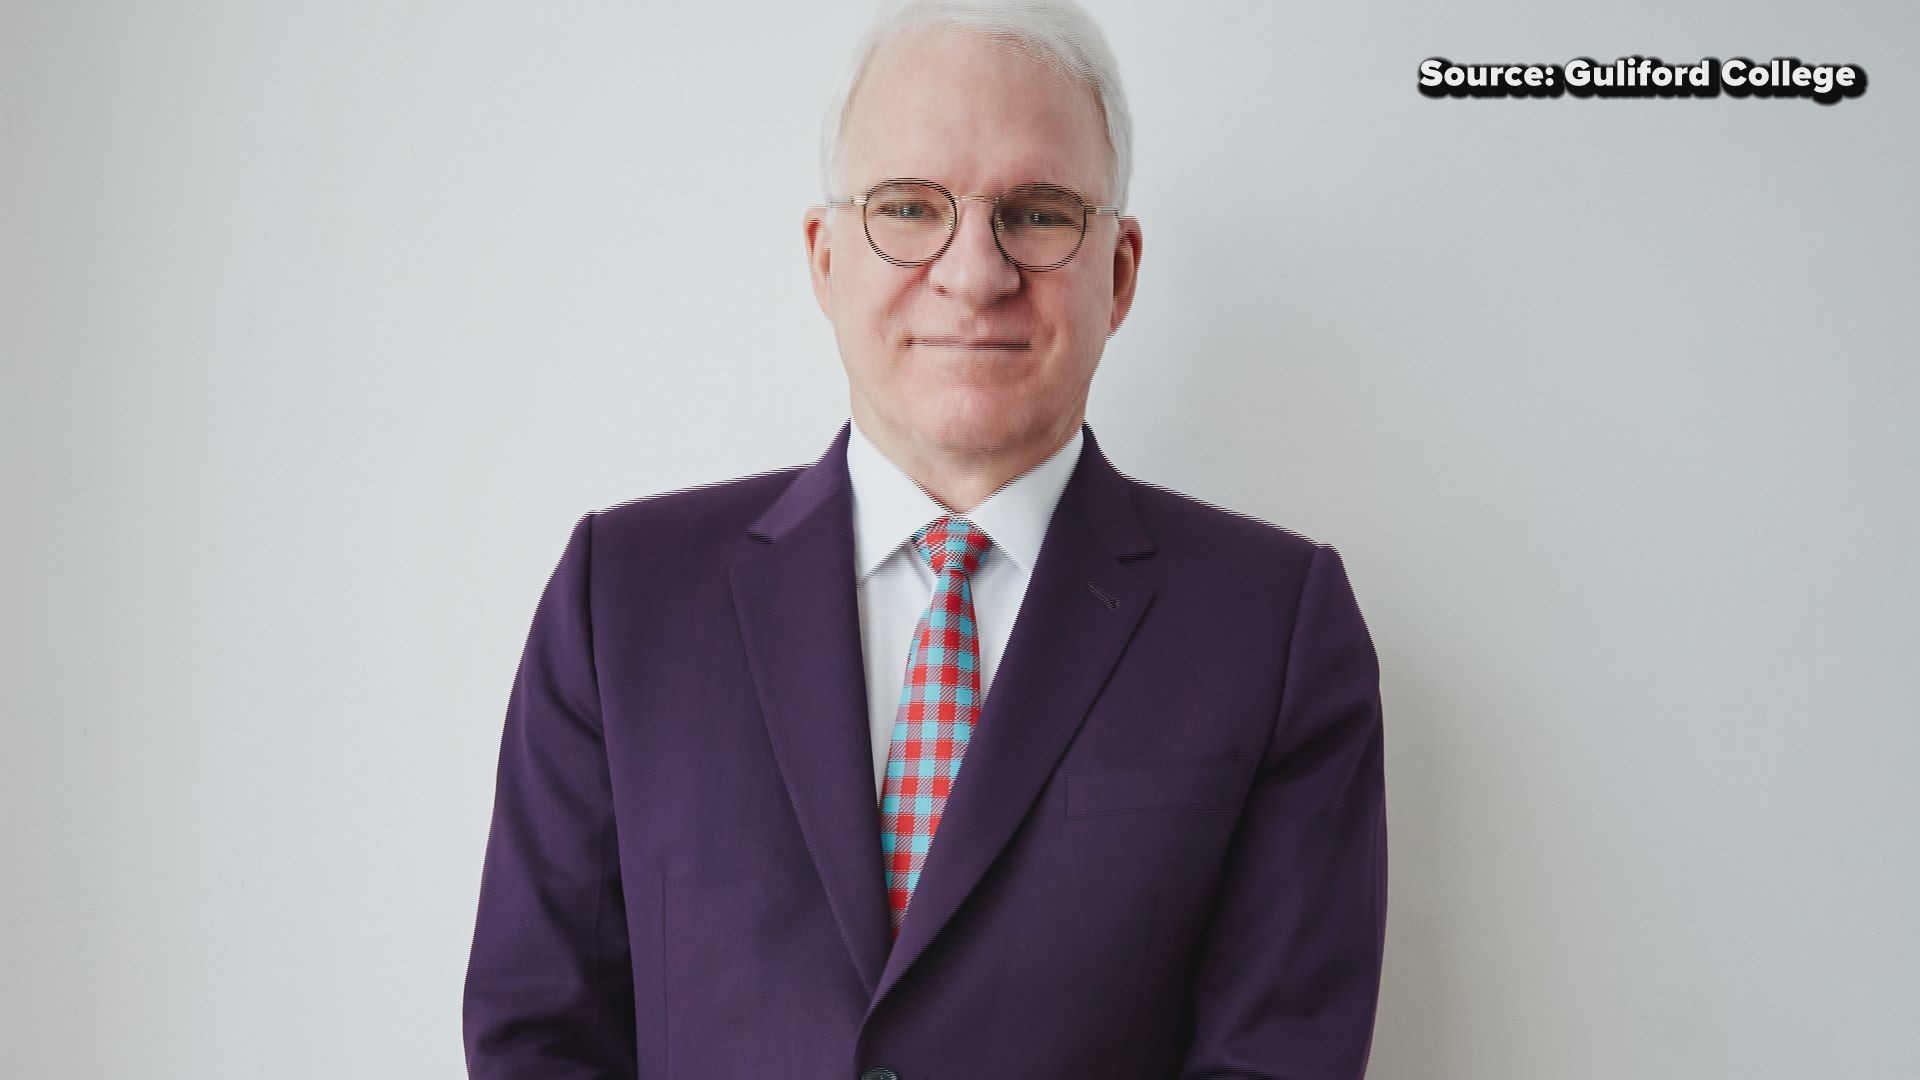 Steve Martin will be featured in Guilford College’s upcoming Bryan Series.